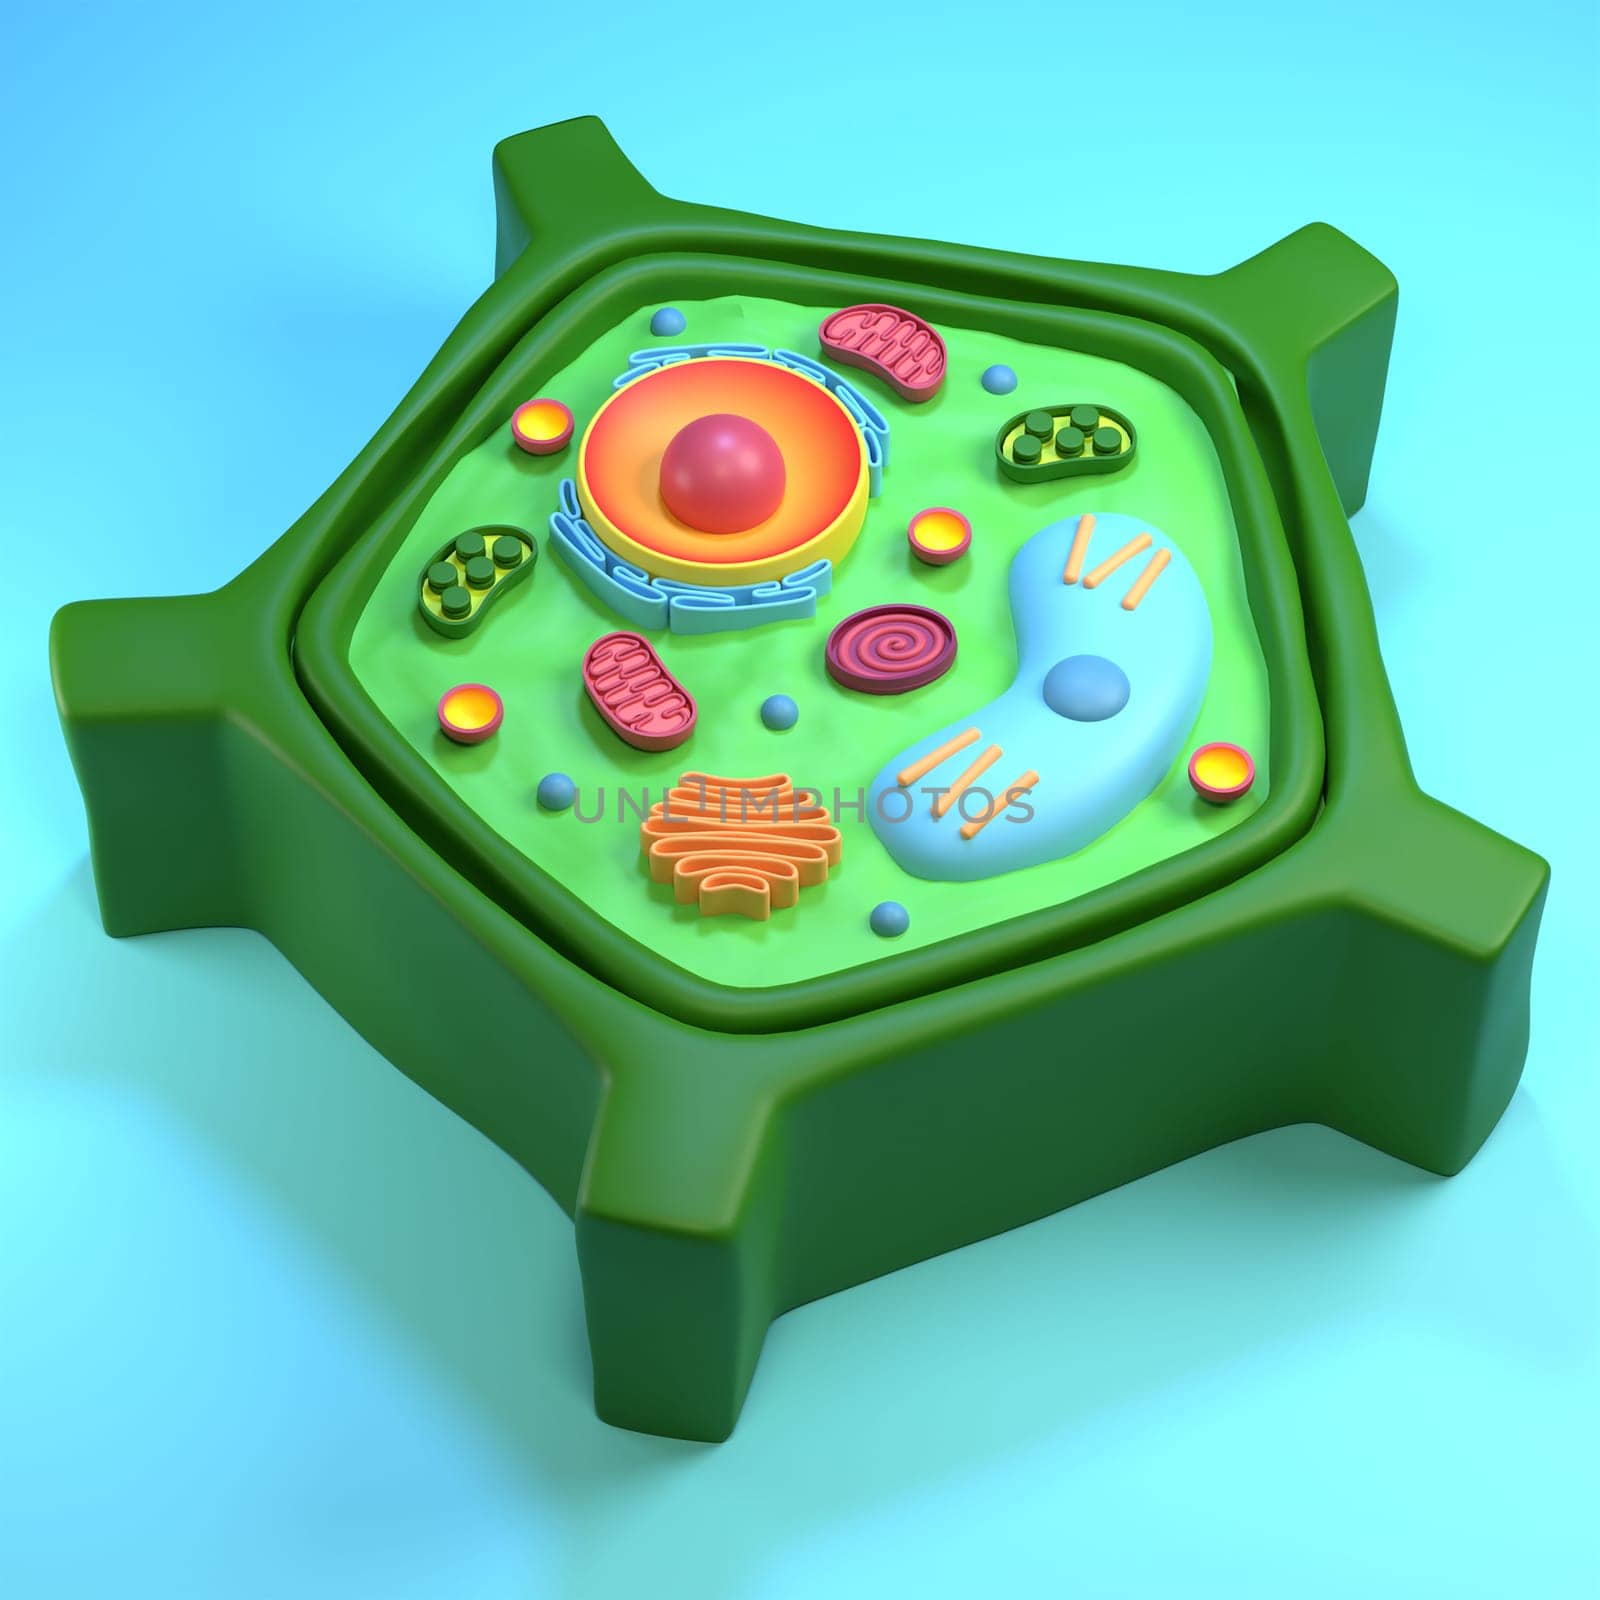 High Resolution Stylized 3D Eukaryotic Plant Cell by AnnaMarin